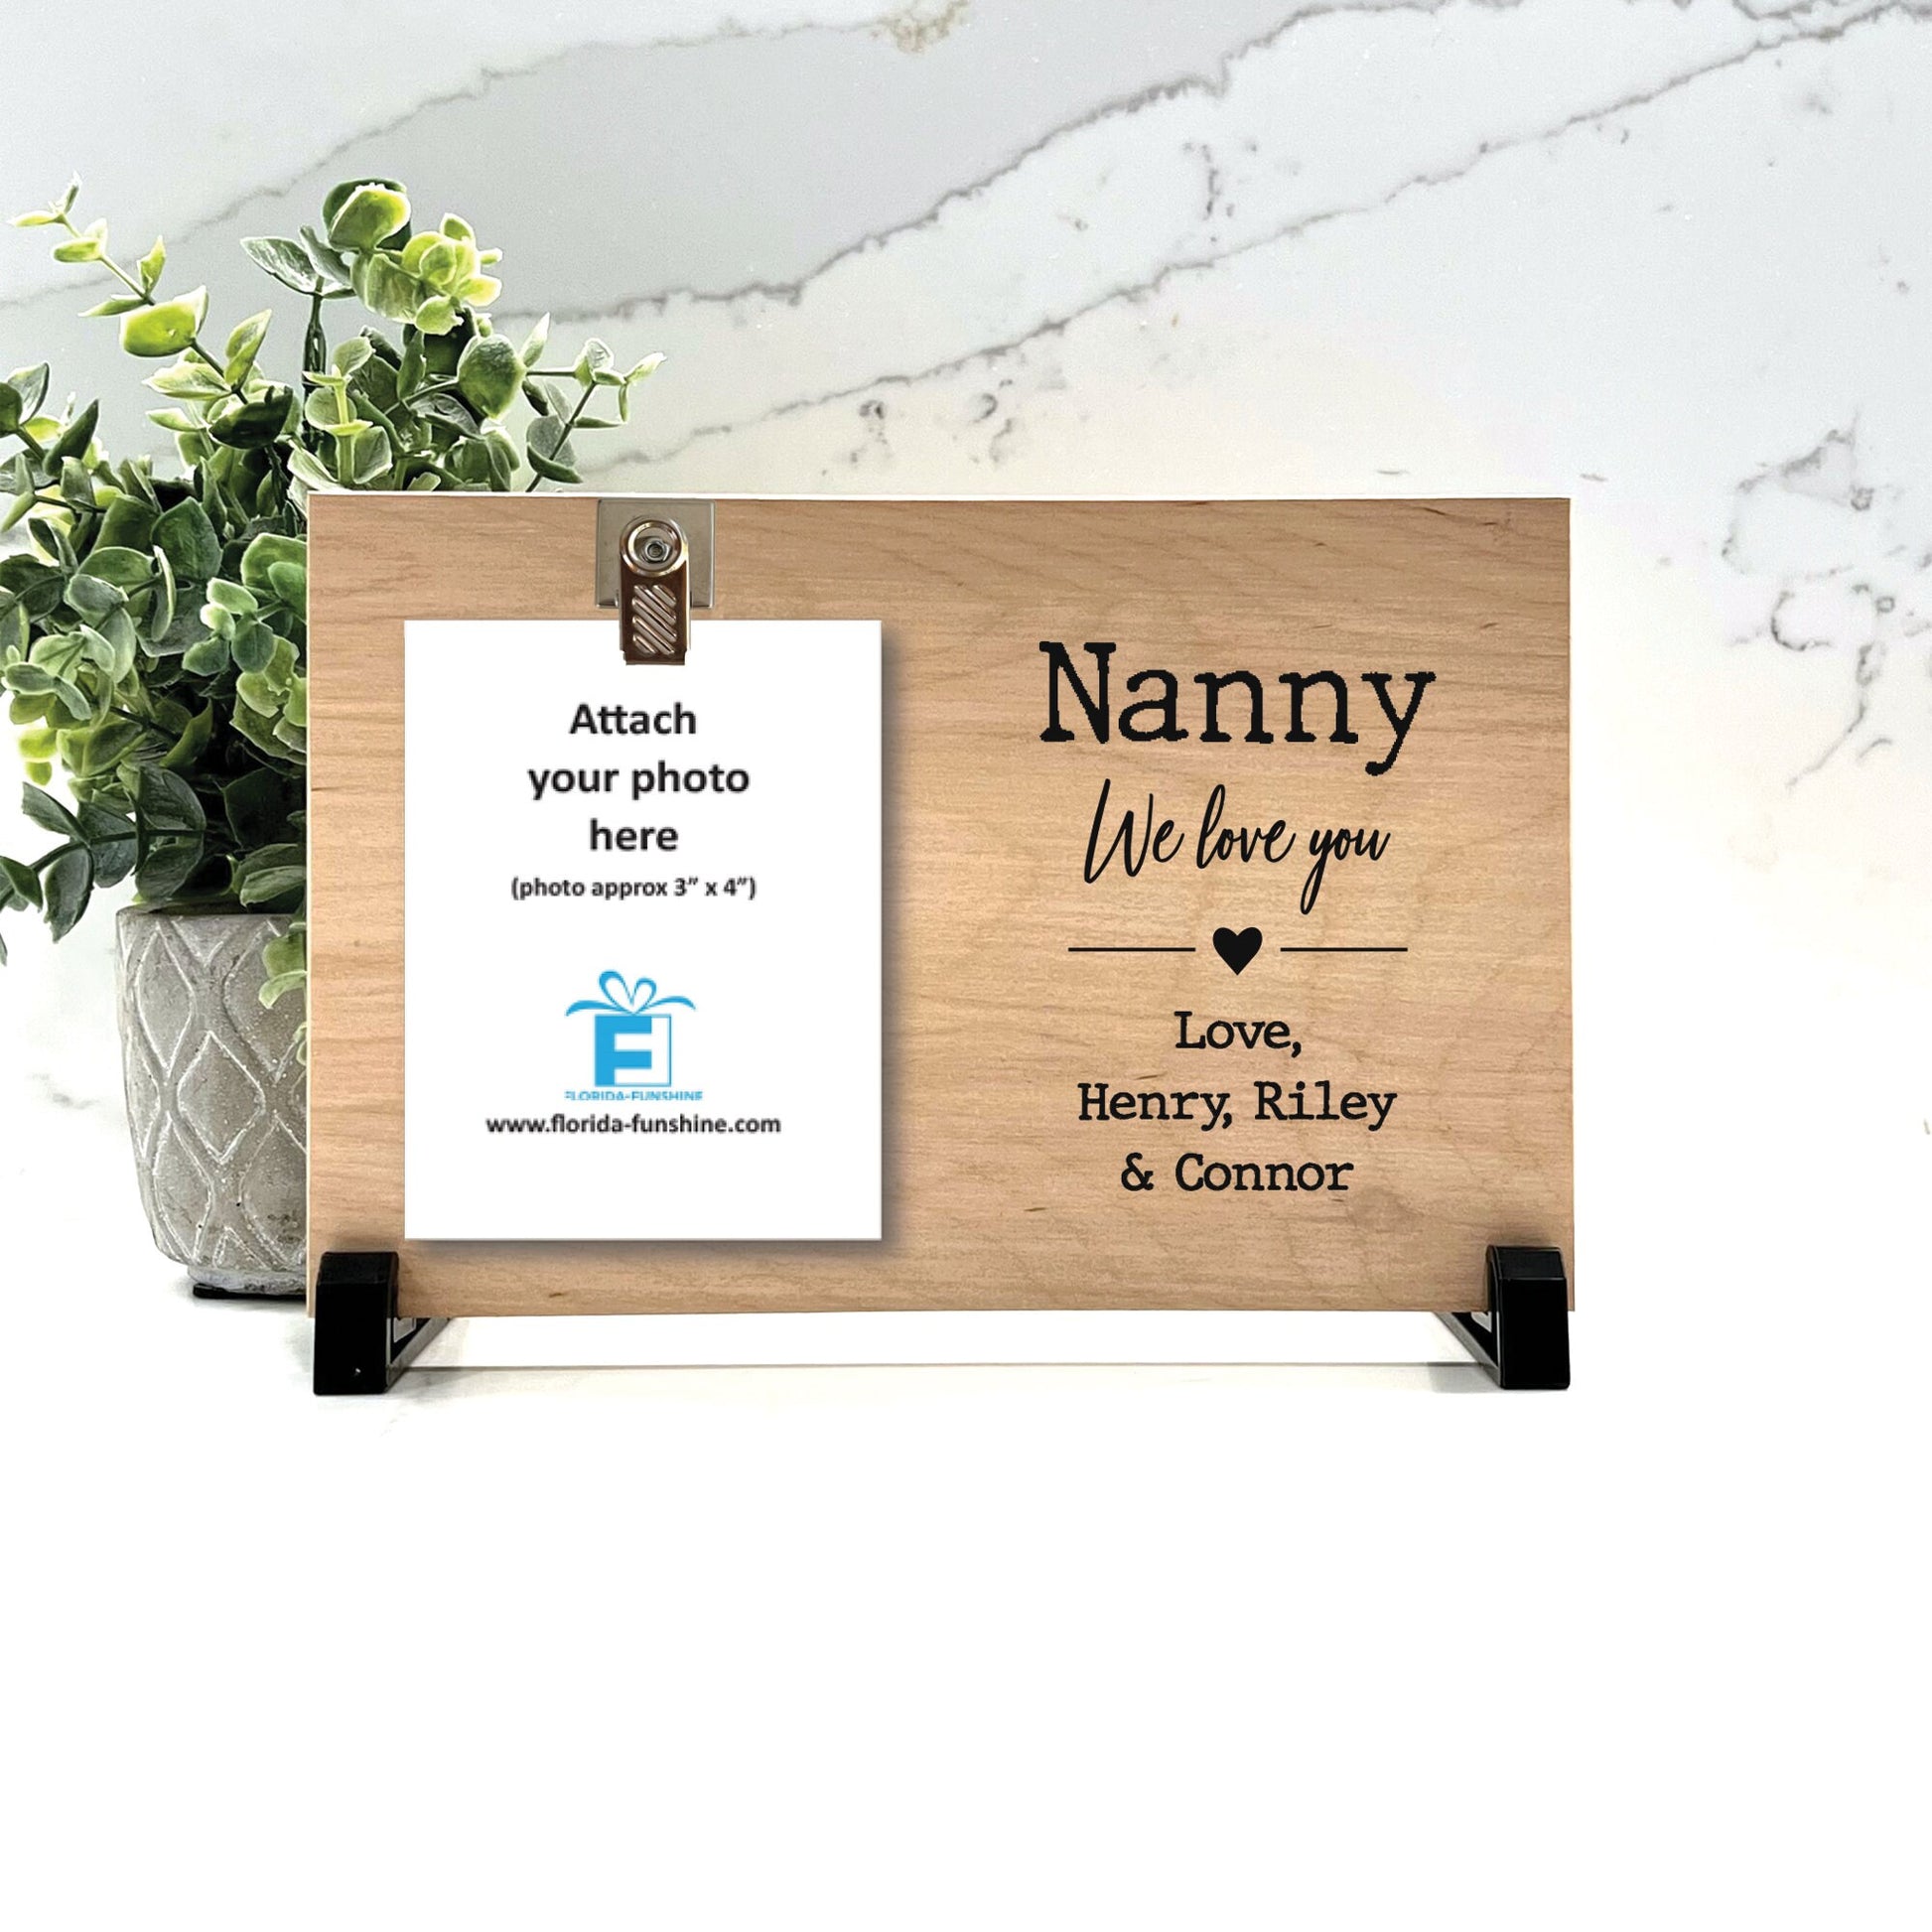 Nanny Frame, Personalized Frame, Personalized Gift for Nanny, Nana, Grandma, Personalized Wood Frame with grandchildren's names